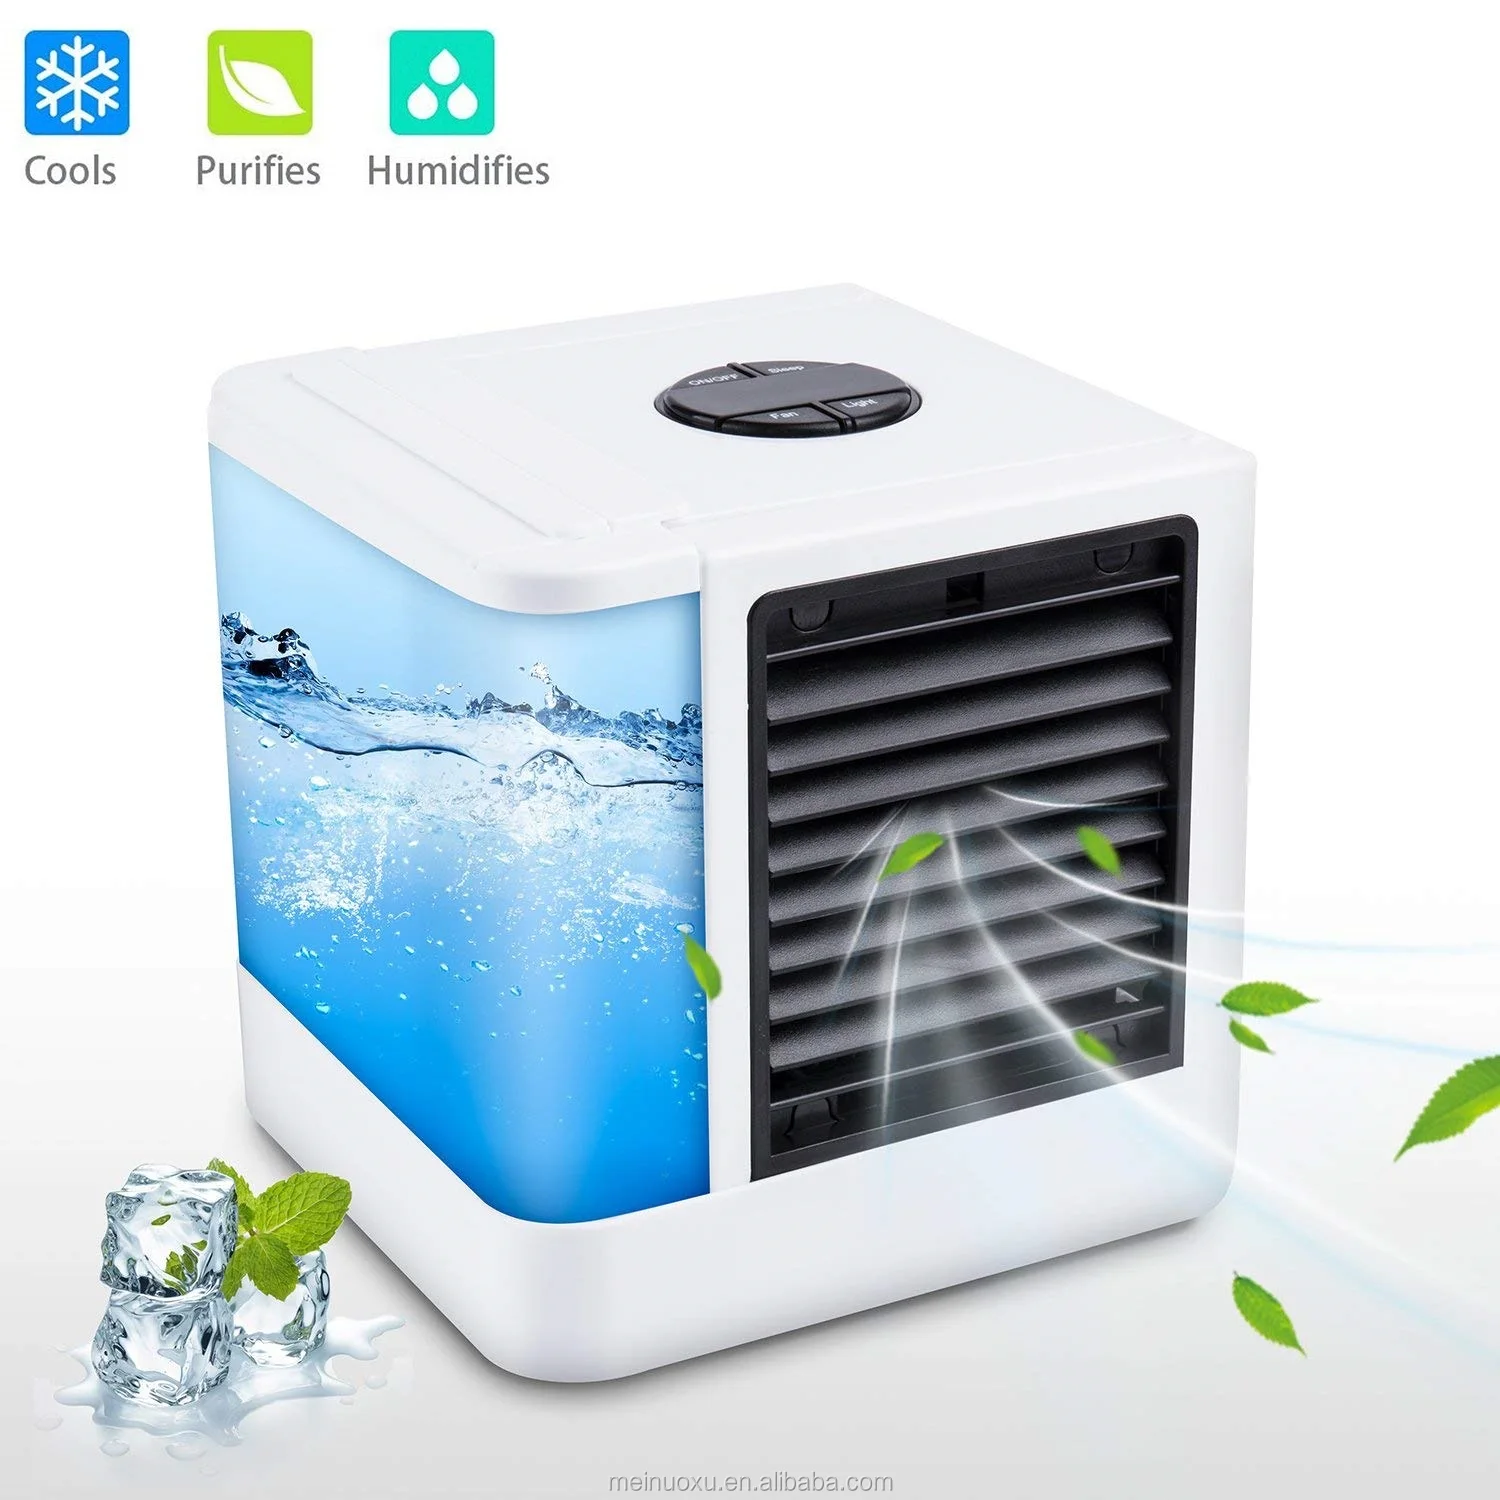 2019 Usb Mini Portable Air Conditioner Humidifier Purifier 7 Colors